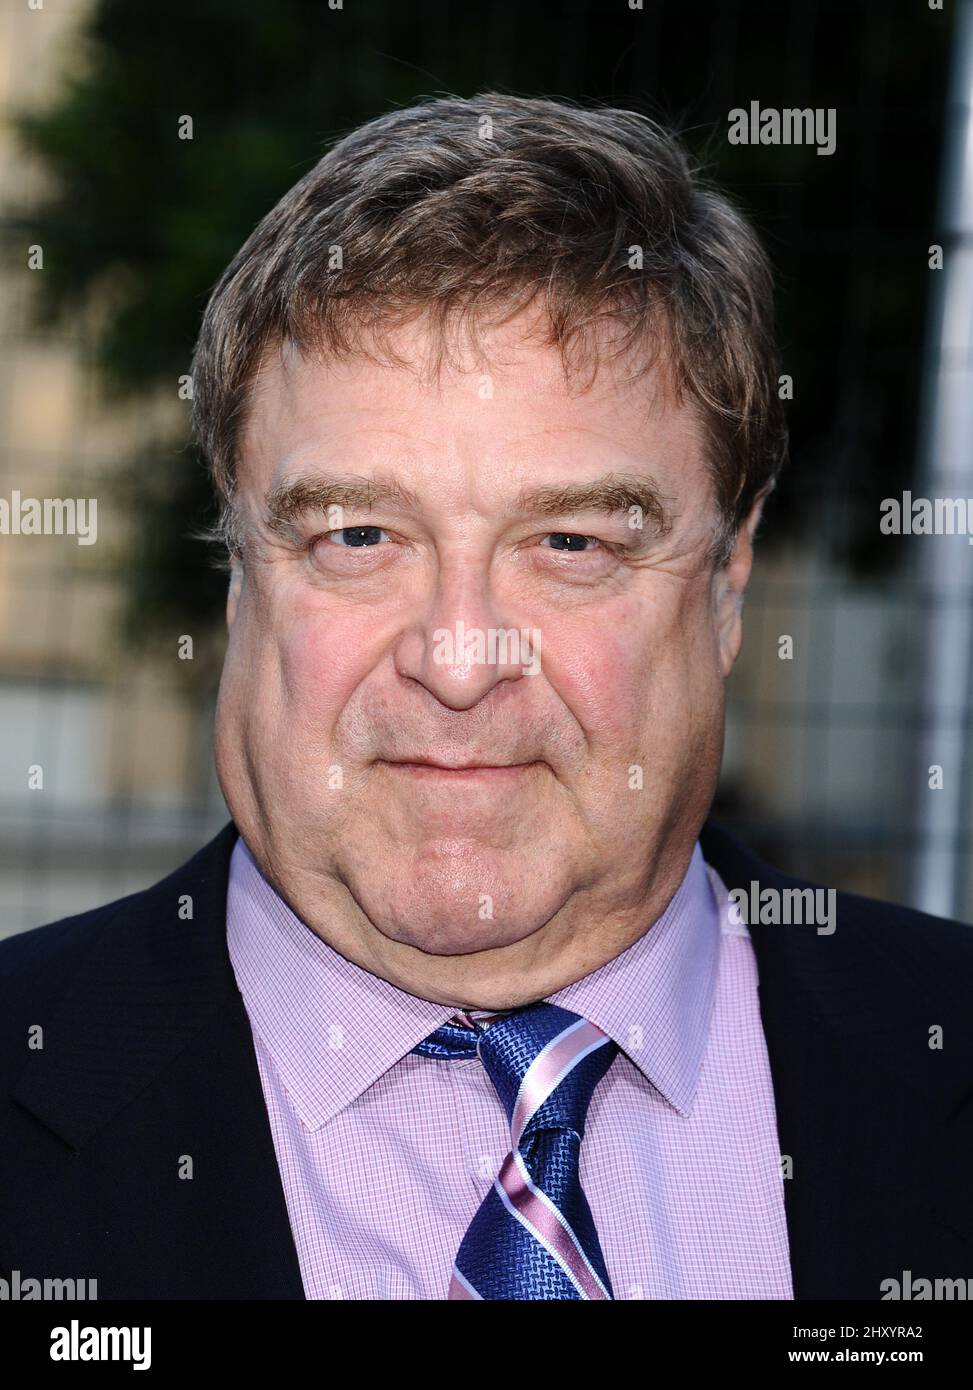 John Goodman attending the premiere of 'Trouble With The Curve' in Los Angeles. Stock Photo